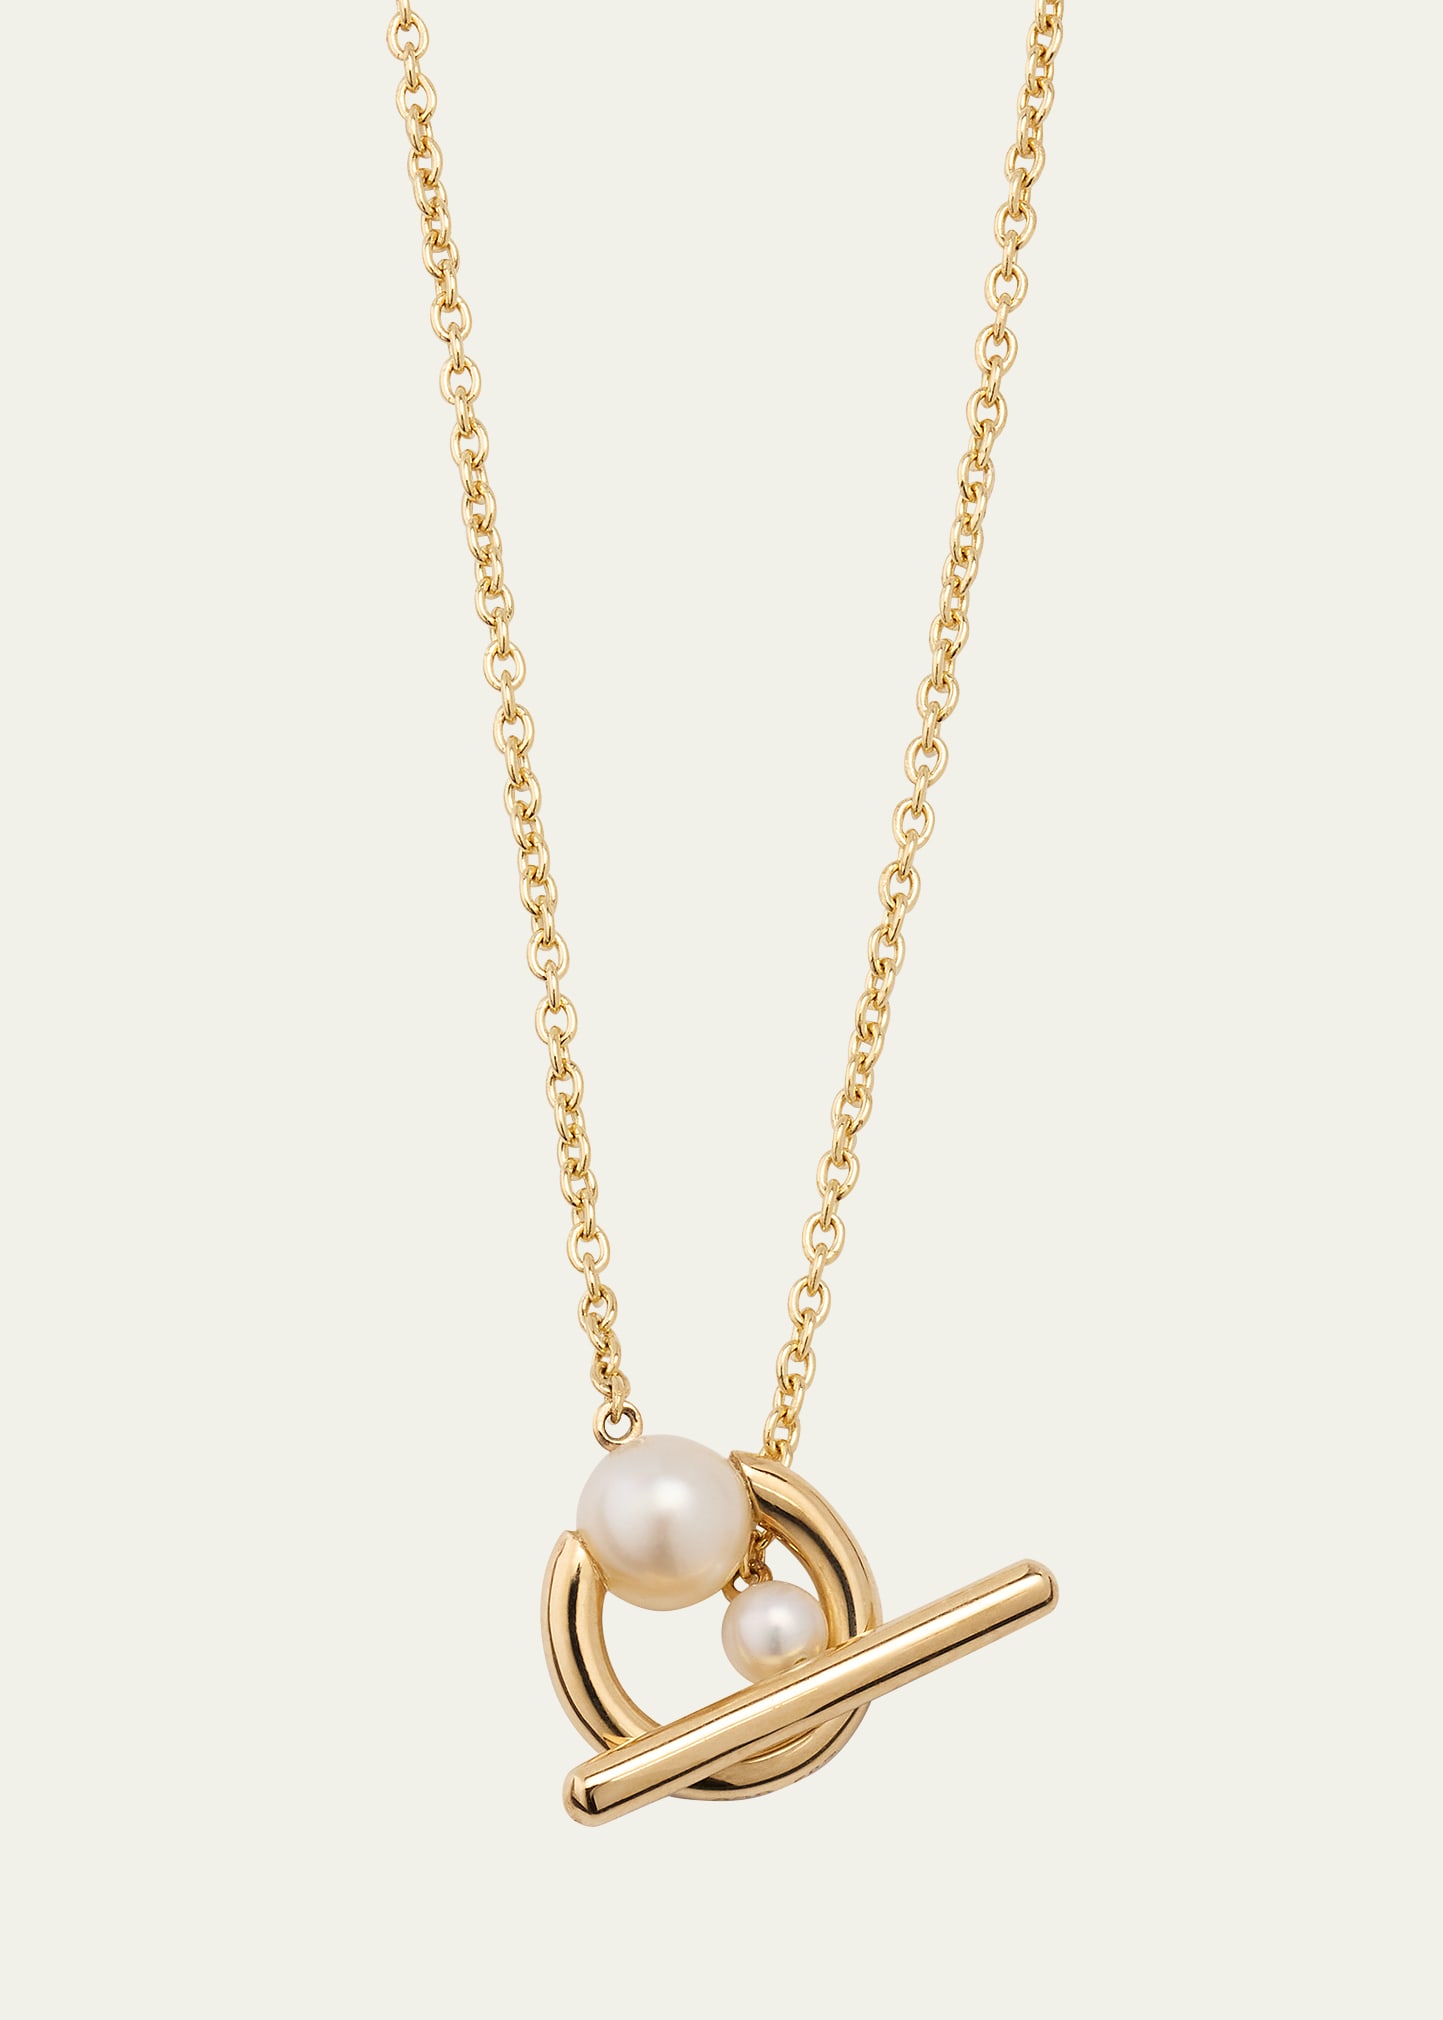 Sophie Bille Brahe 14k Recycled Yellow Gold Claudia Simple Necklace With Freshwater Pearls In Yg